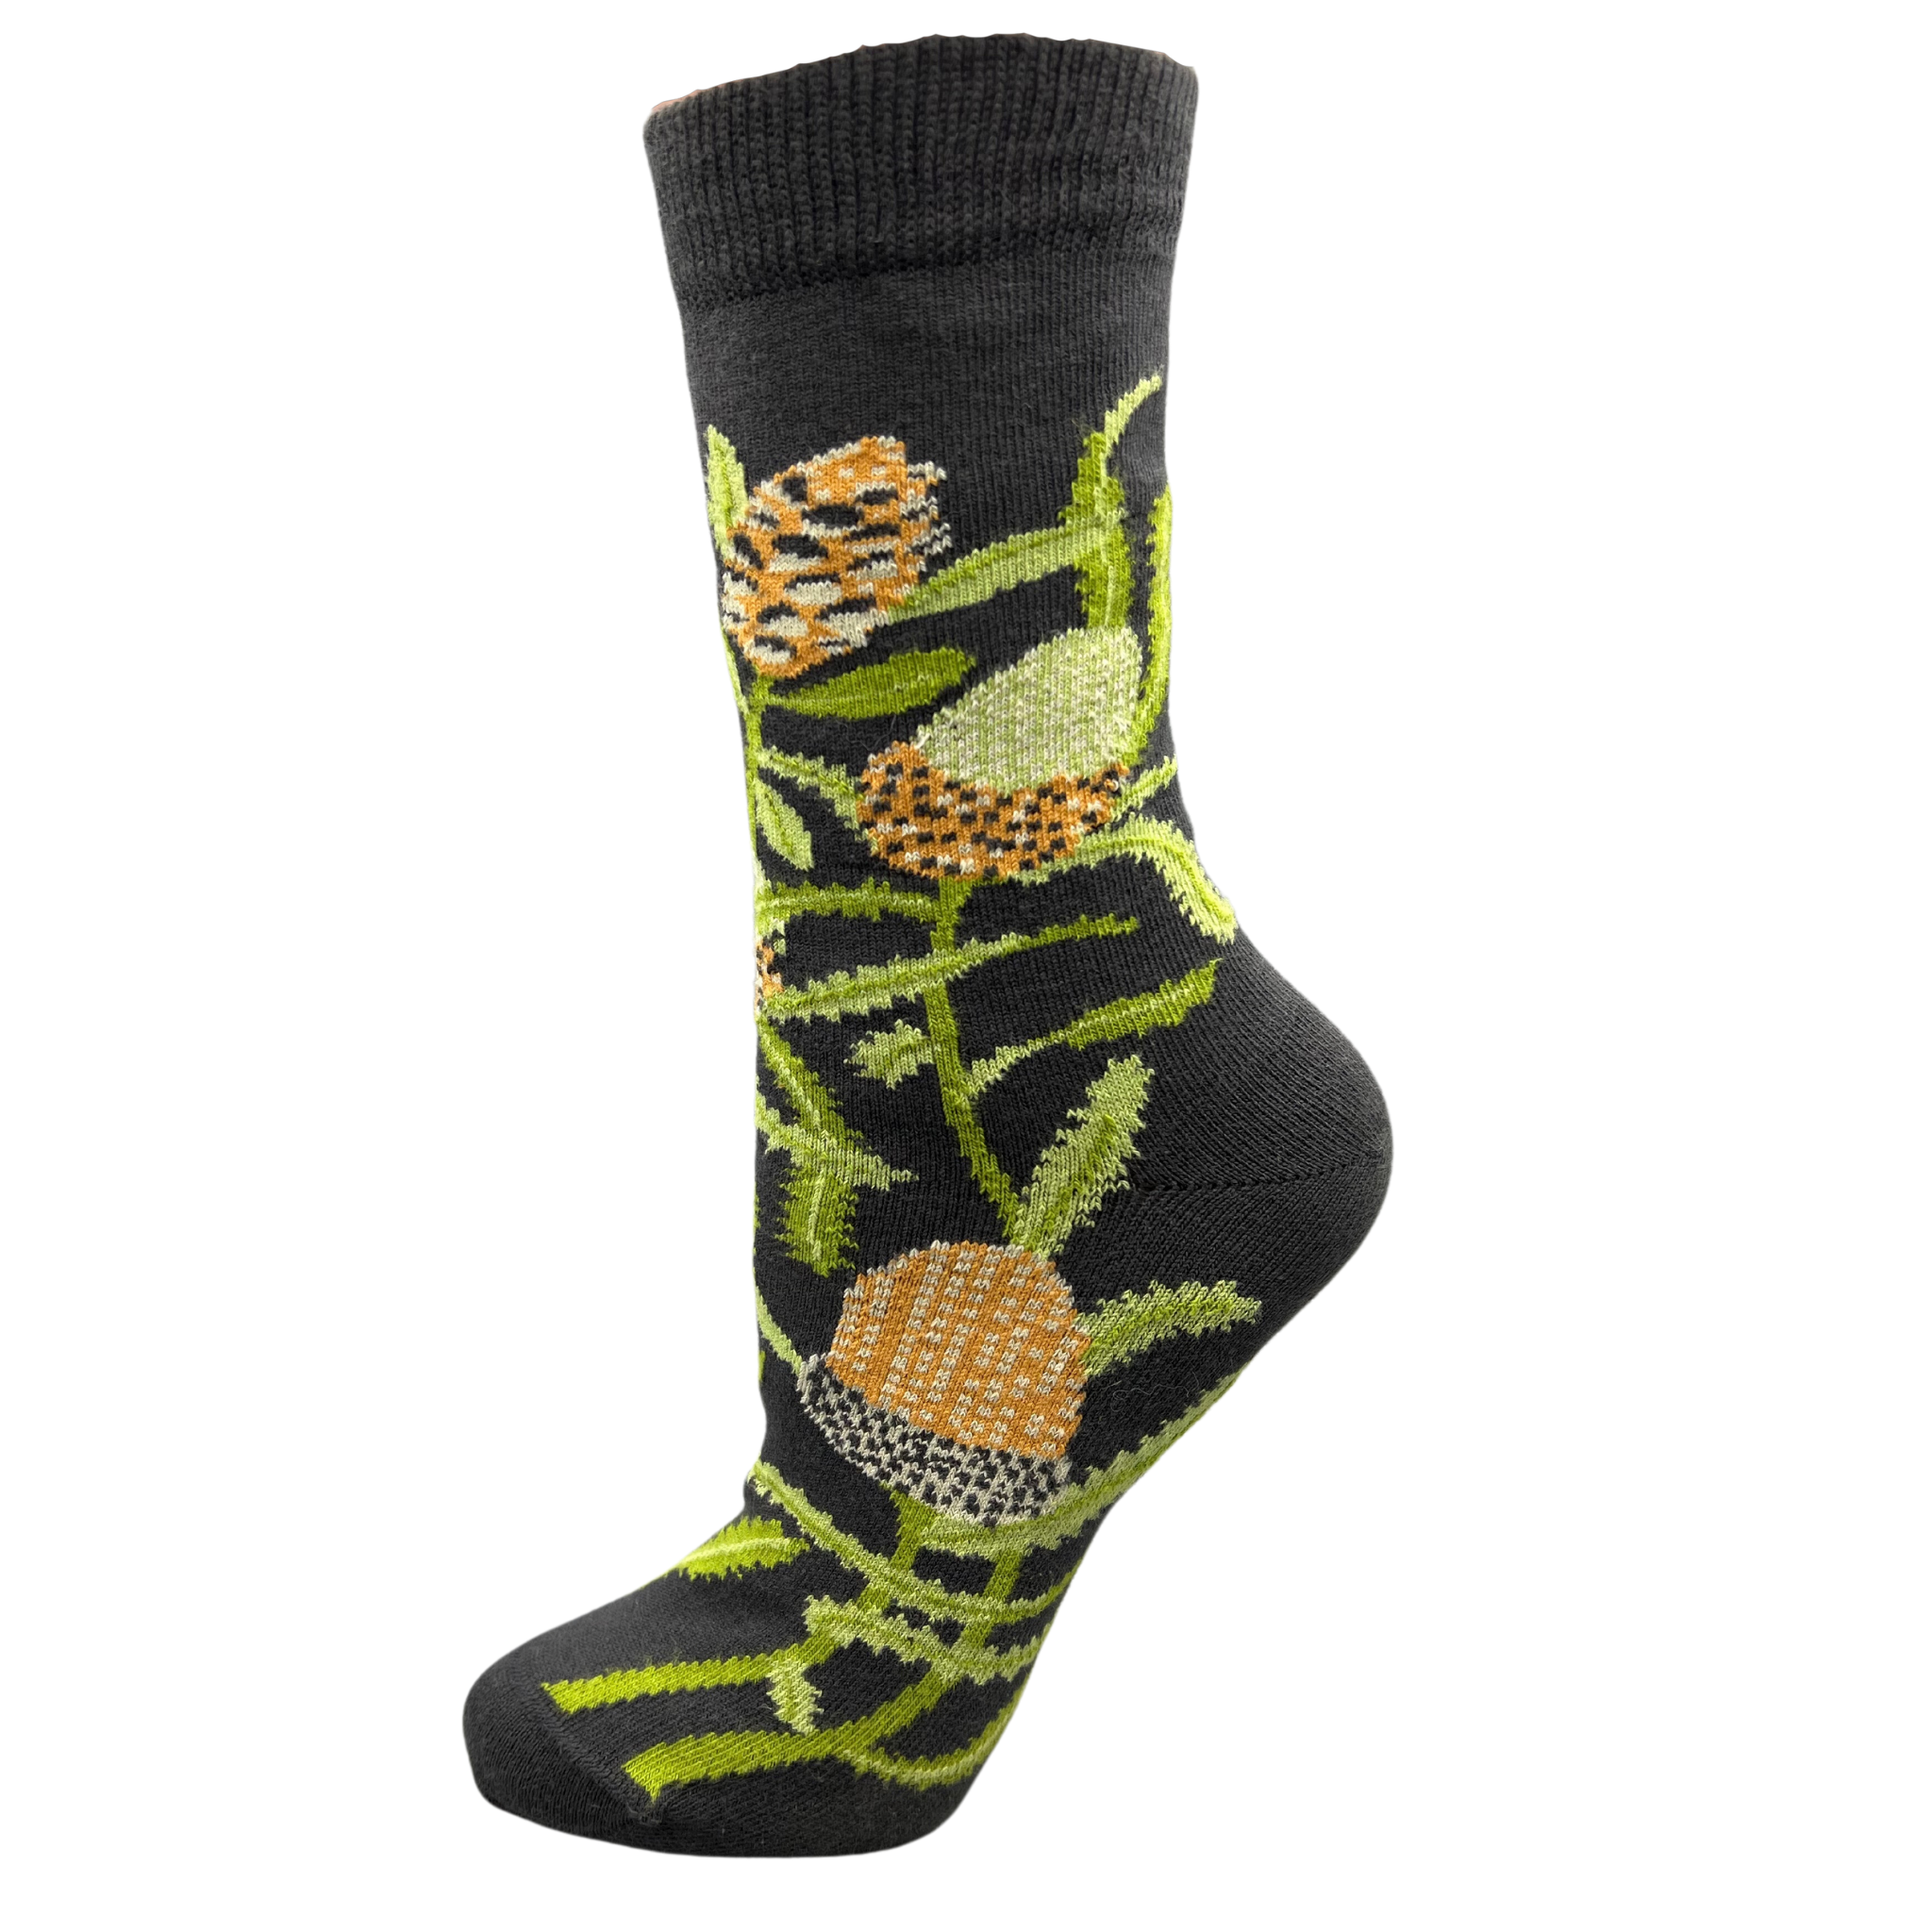 sock featuring banksias on a dark background - The Sockery